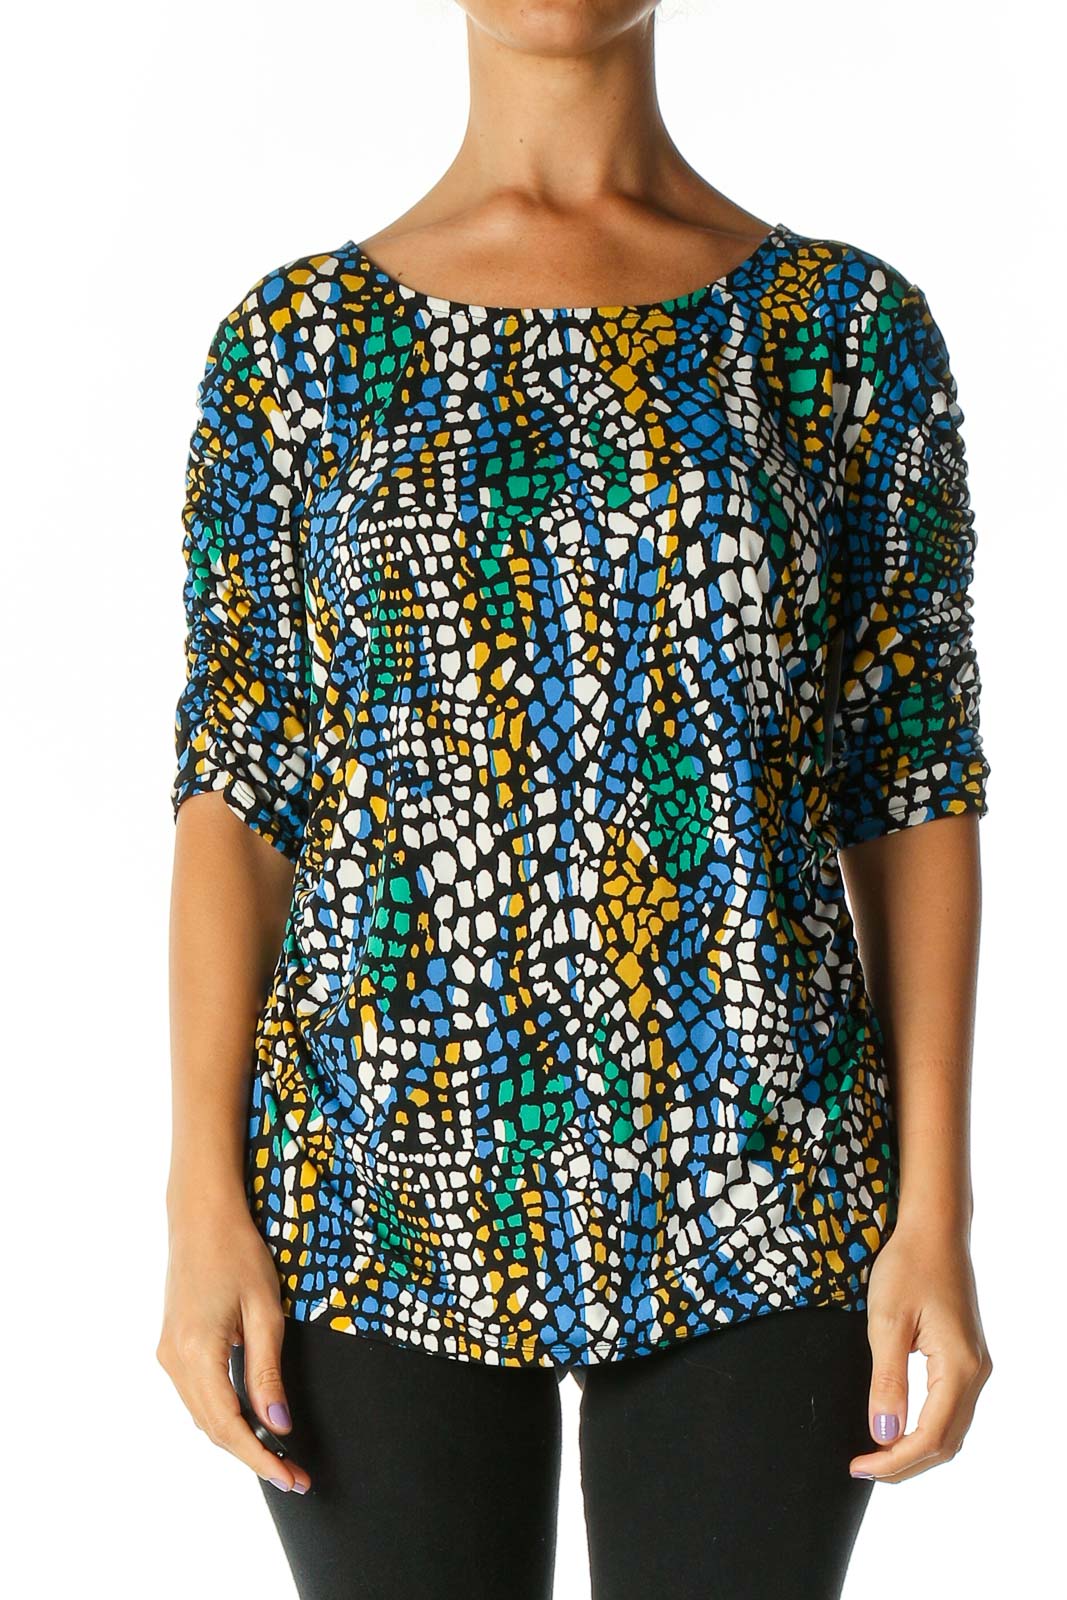 Blue Geometric Print Casual Blouse Front